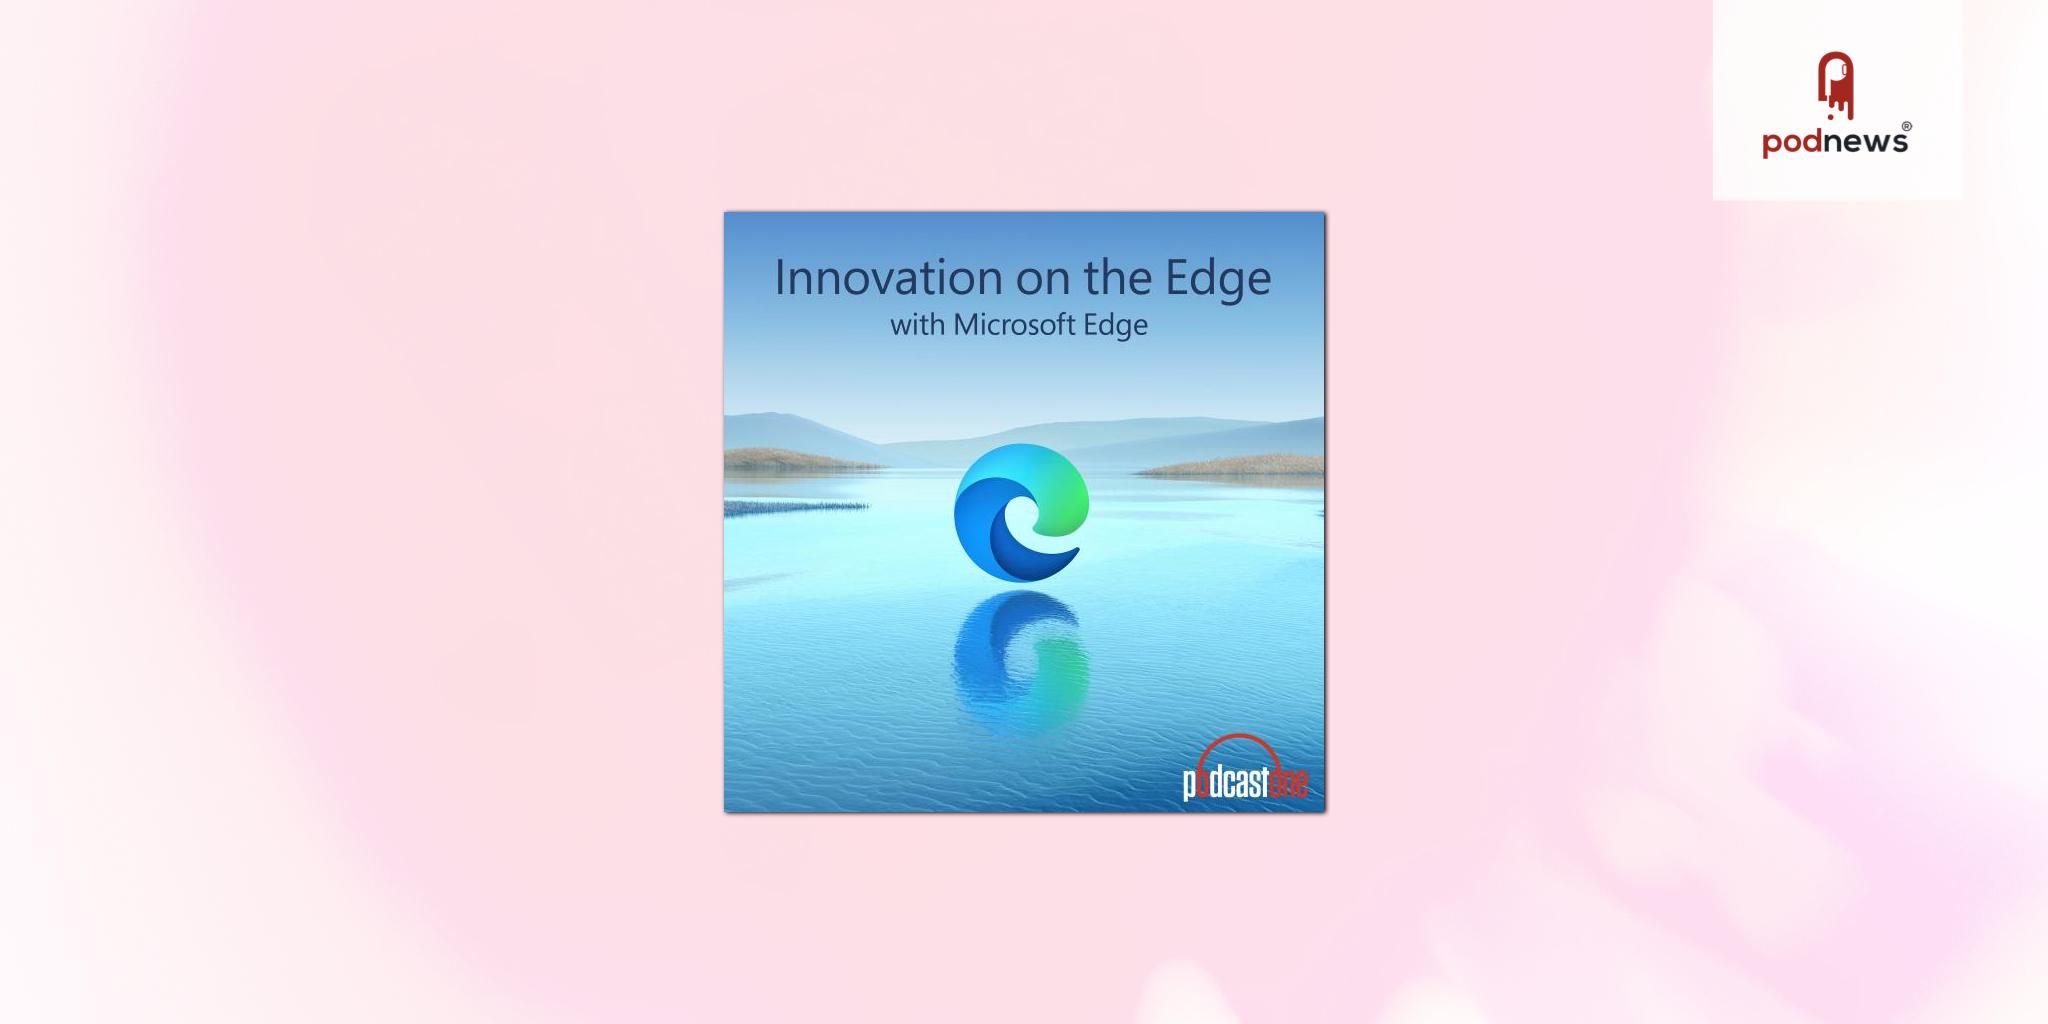 LiveXLive's PodcastOne teams with Microsoft Edge for Innovation on the Edge Podcast